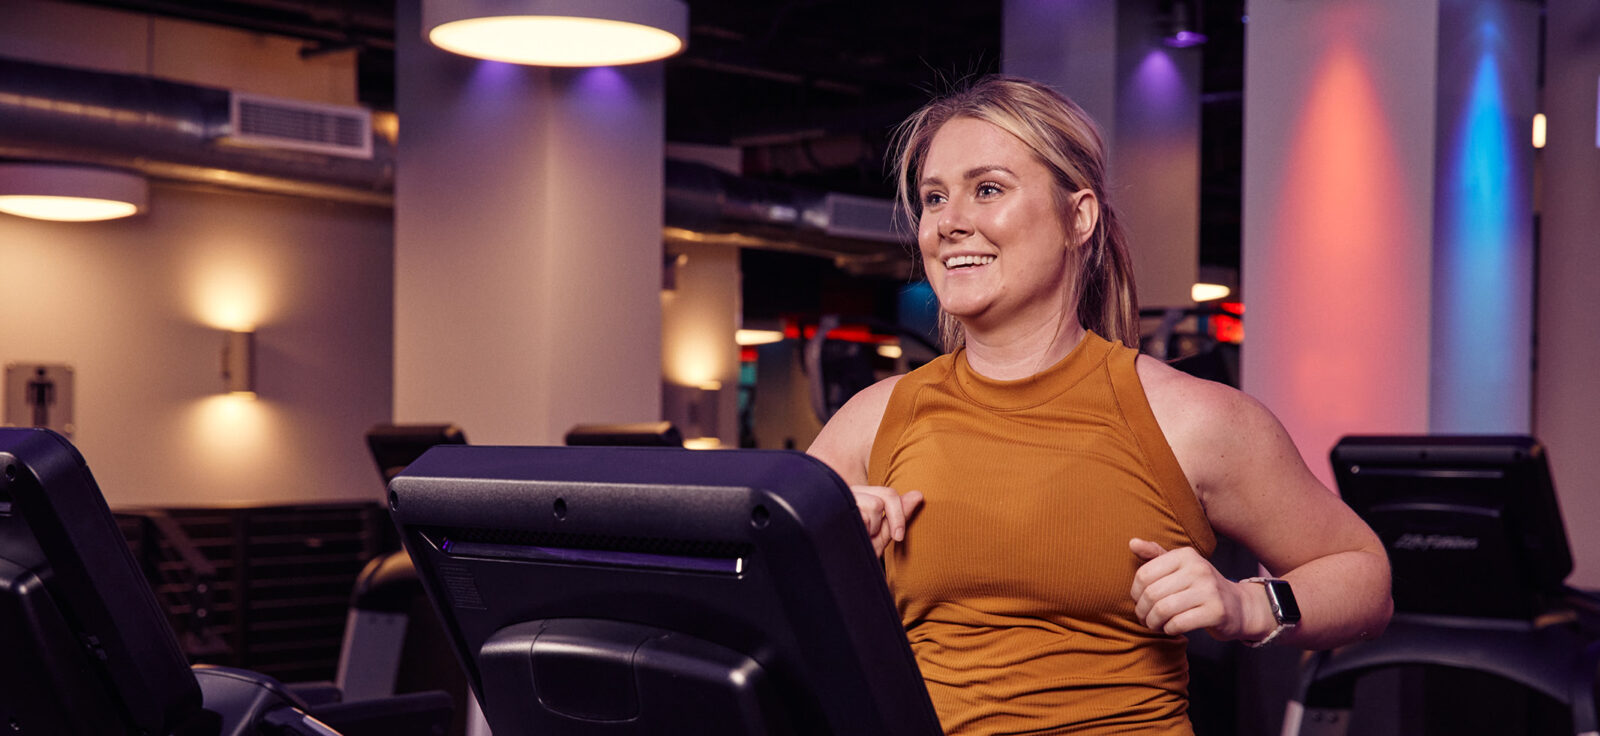 A Slice of Brie: Orangetheory Fitness - What to Expect on Your First Visit